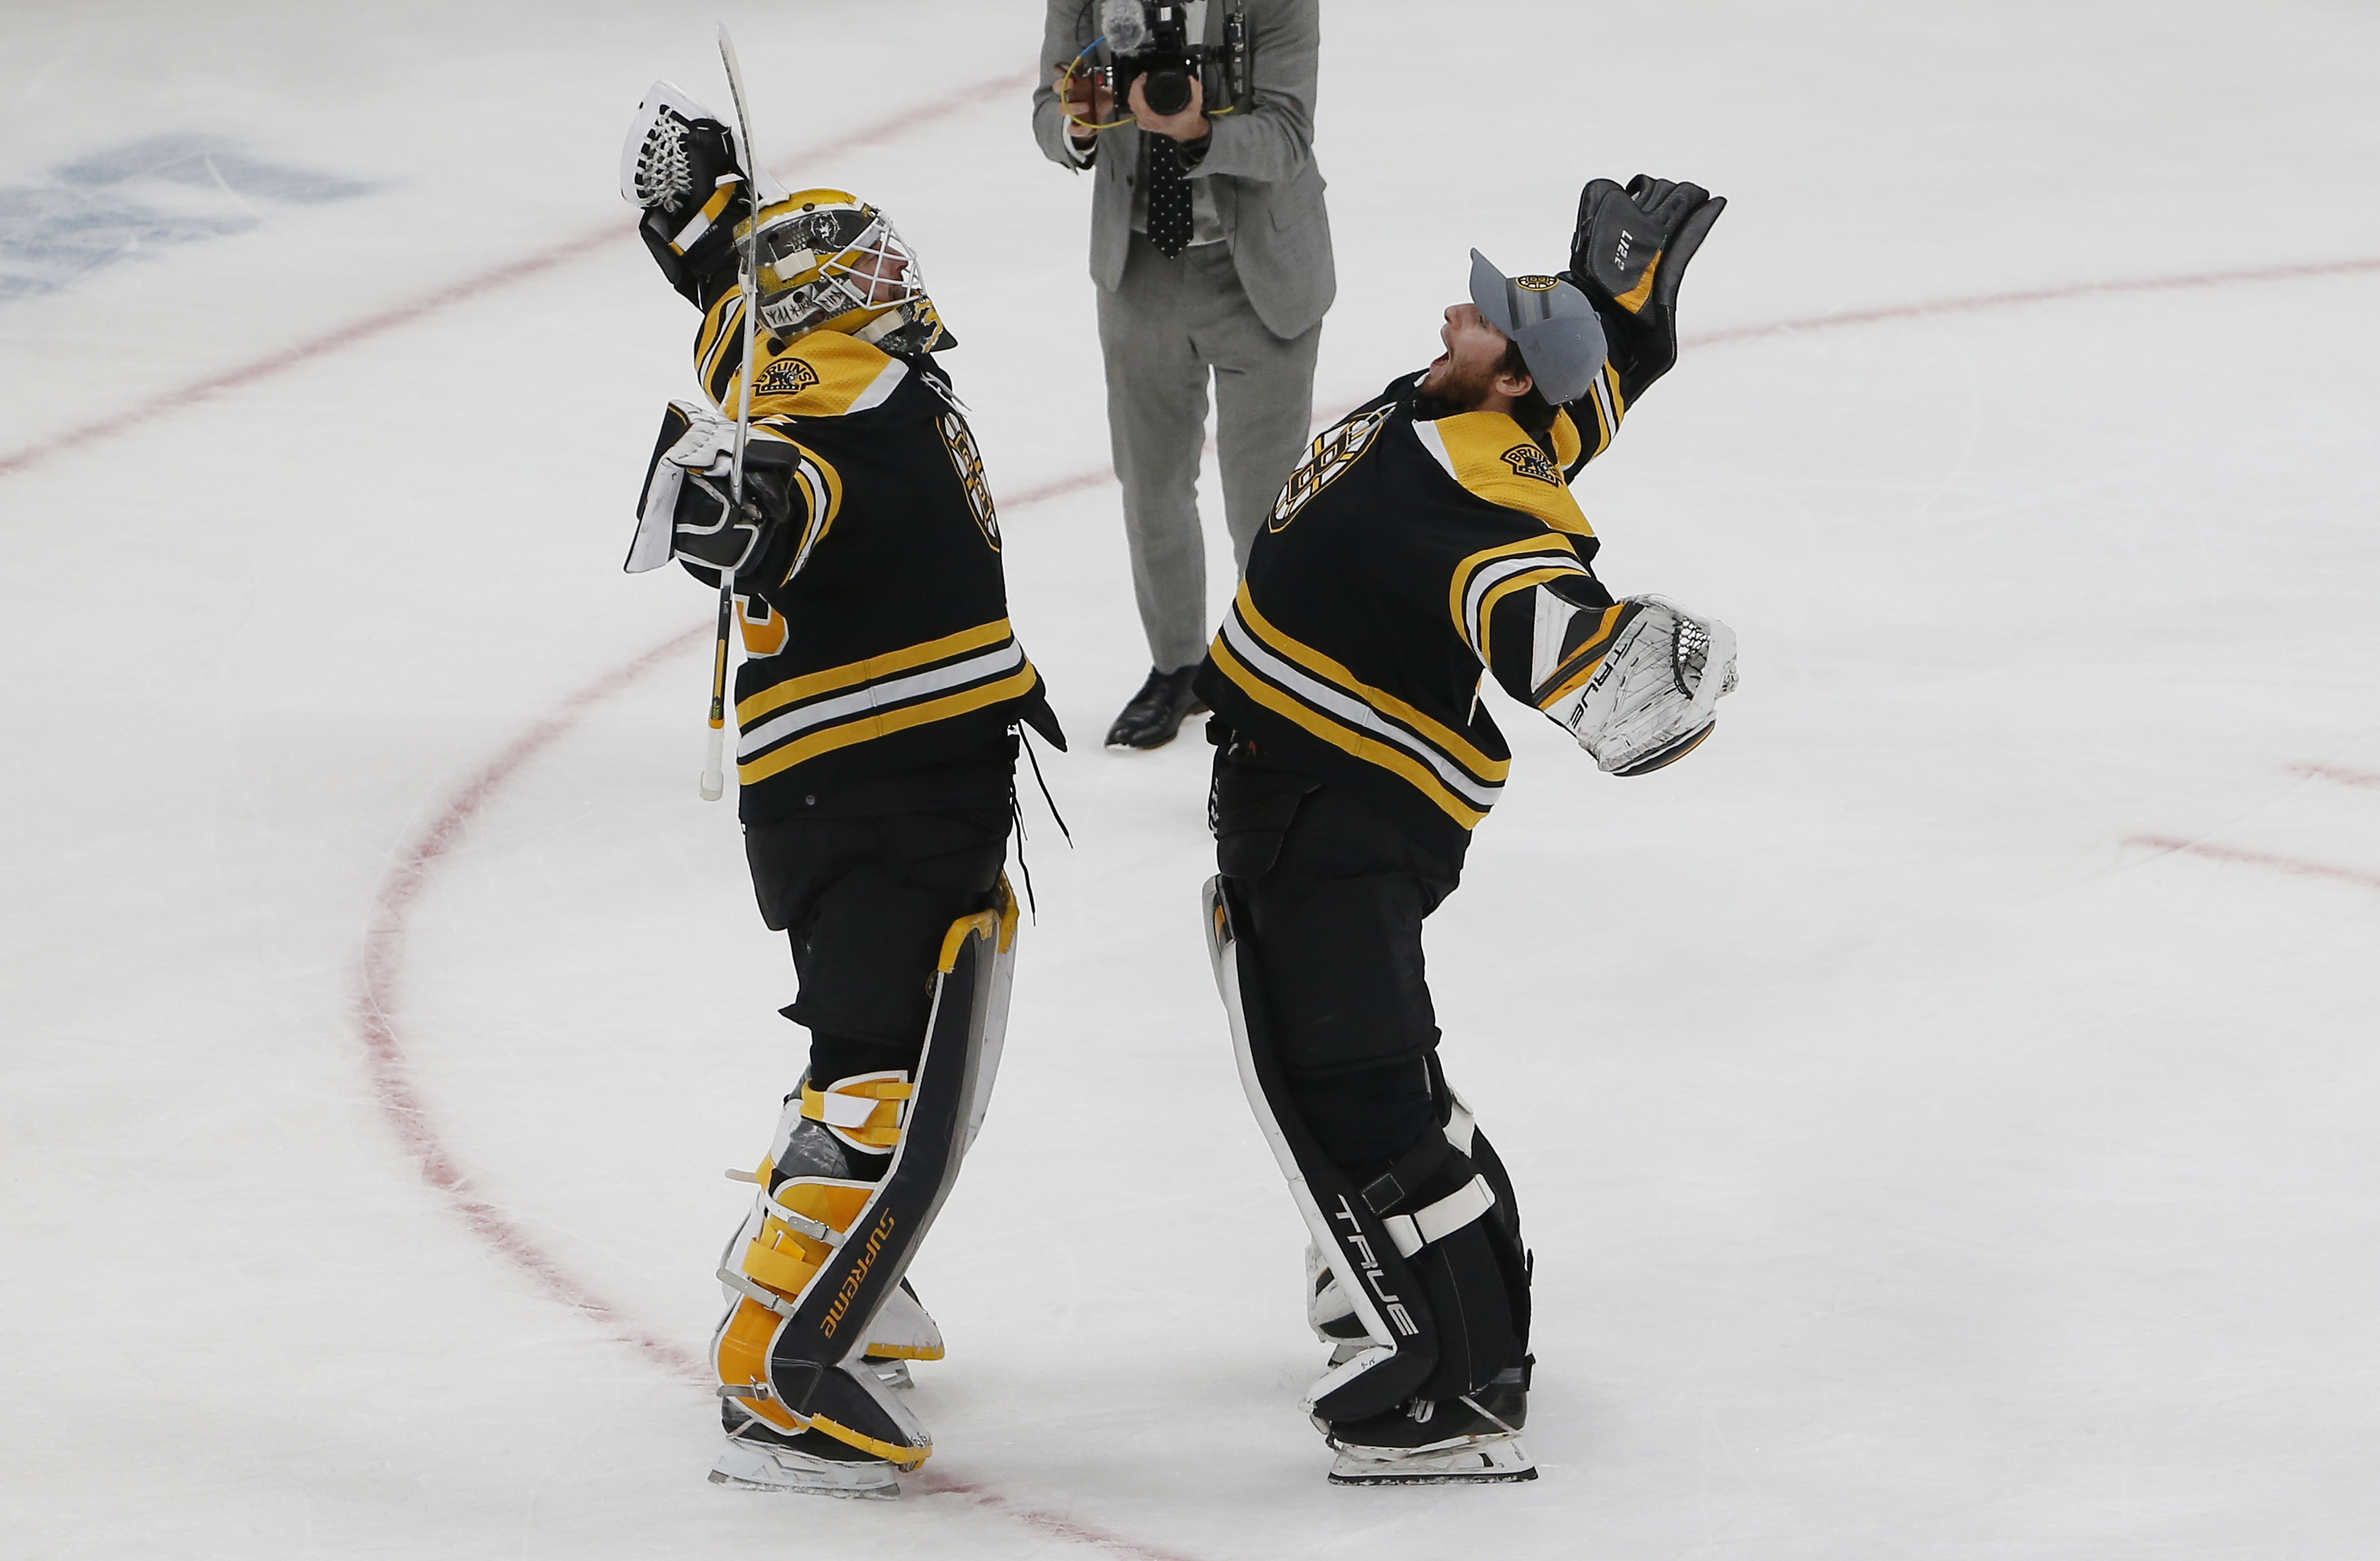 Boston Bruins - Tuukka Rask recorded his 253rd career win today, become the  winningest goalie in the history of the Bruins franchise. Congratulations  Tuukka!